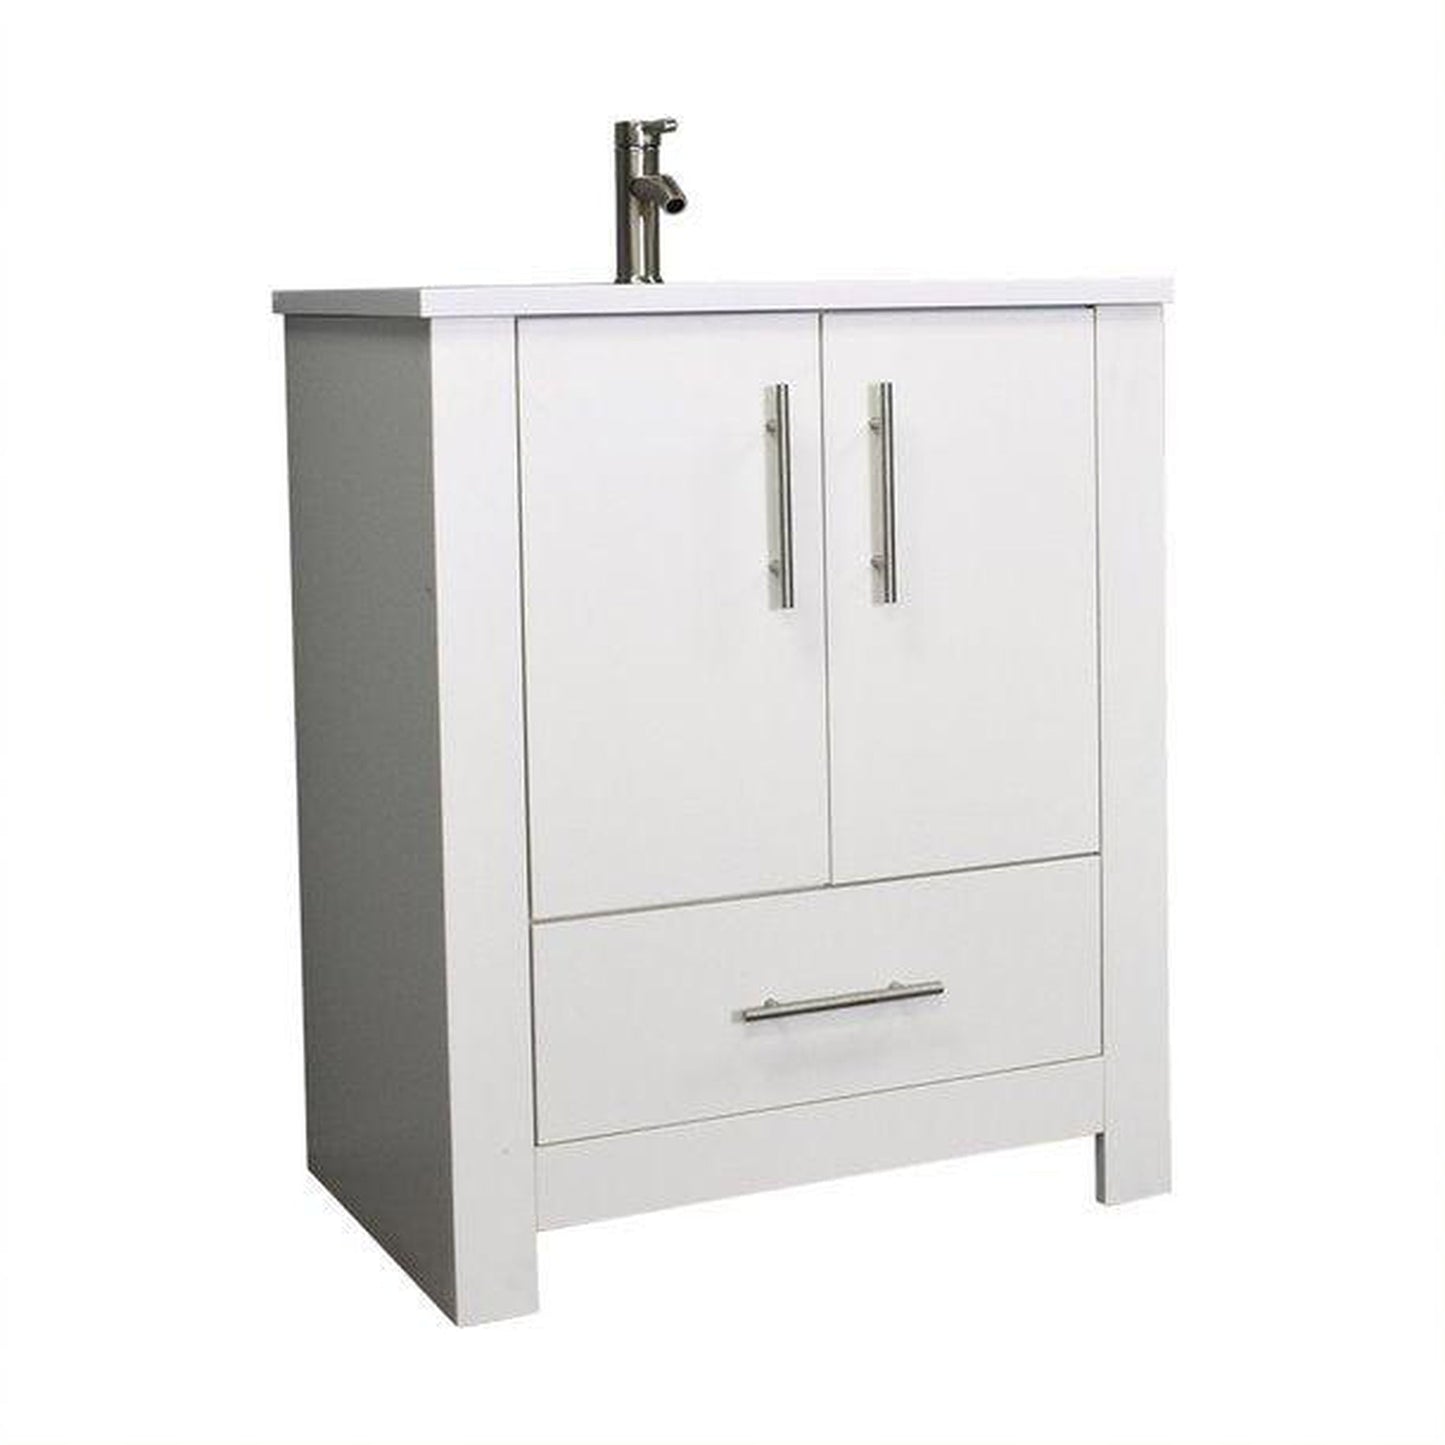 Volpa USA Boston 24" x 20" White Modern Freestanding Bathroom Vanity With Acrylic Top, Integrated Acrylic Sink And Brushed Nickel Handles